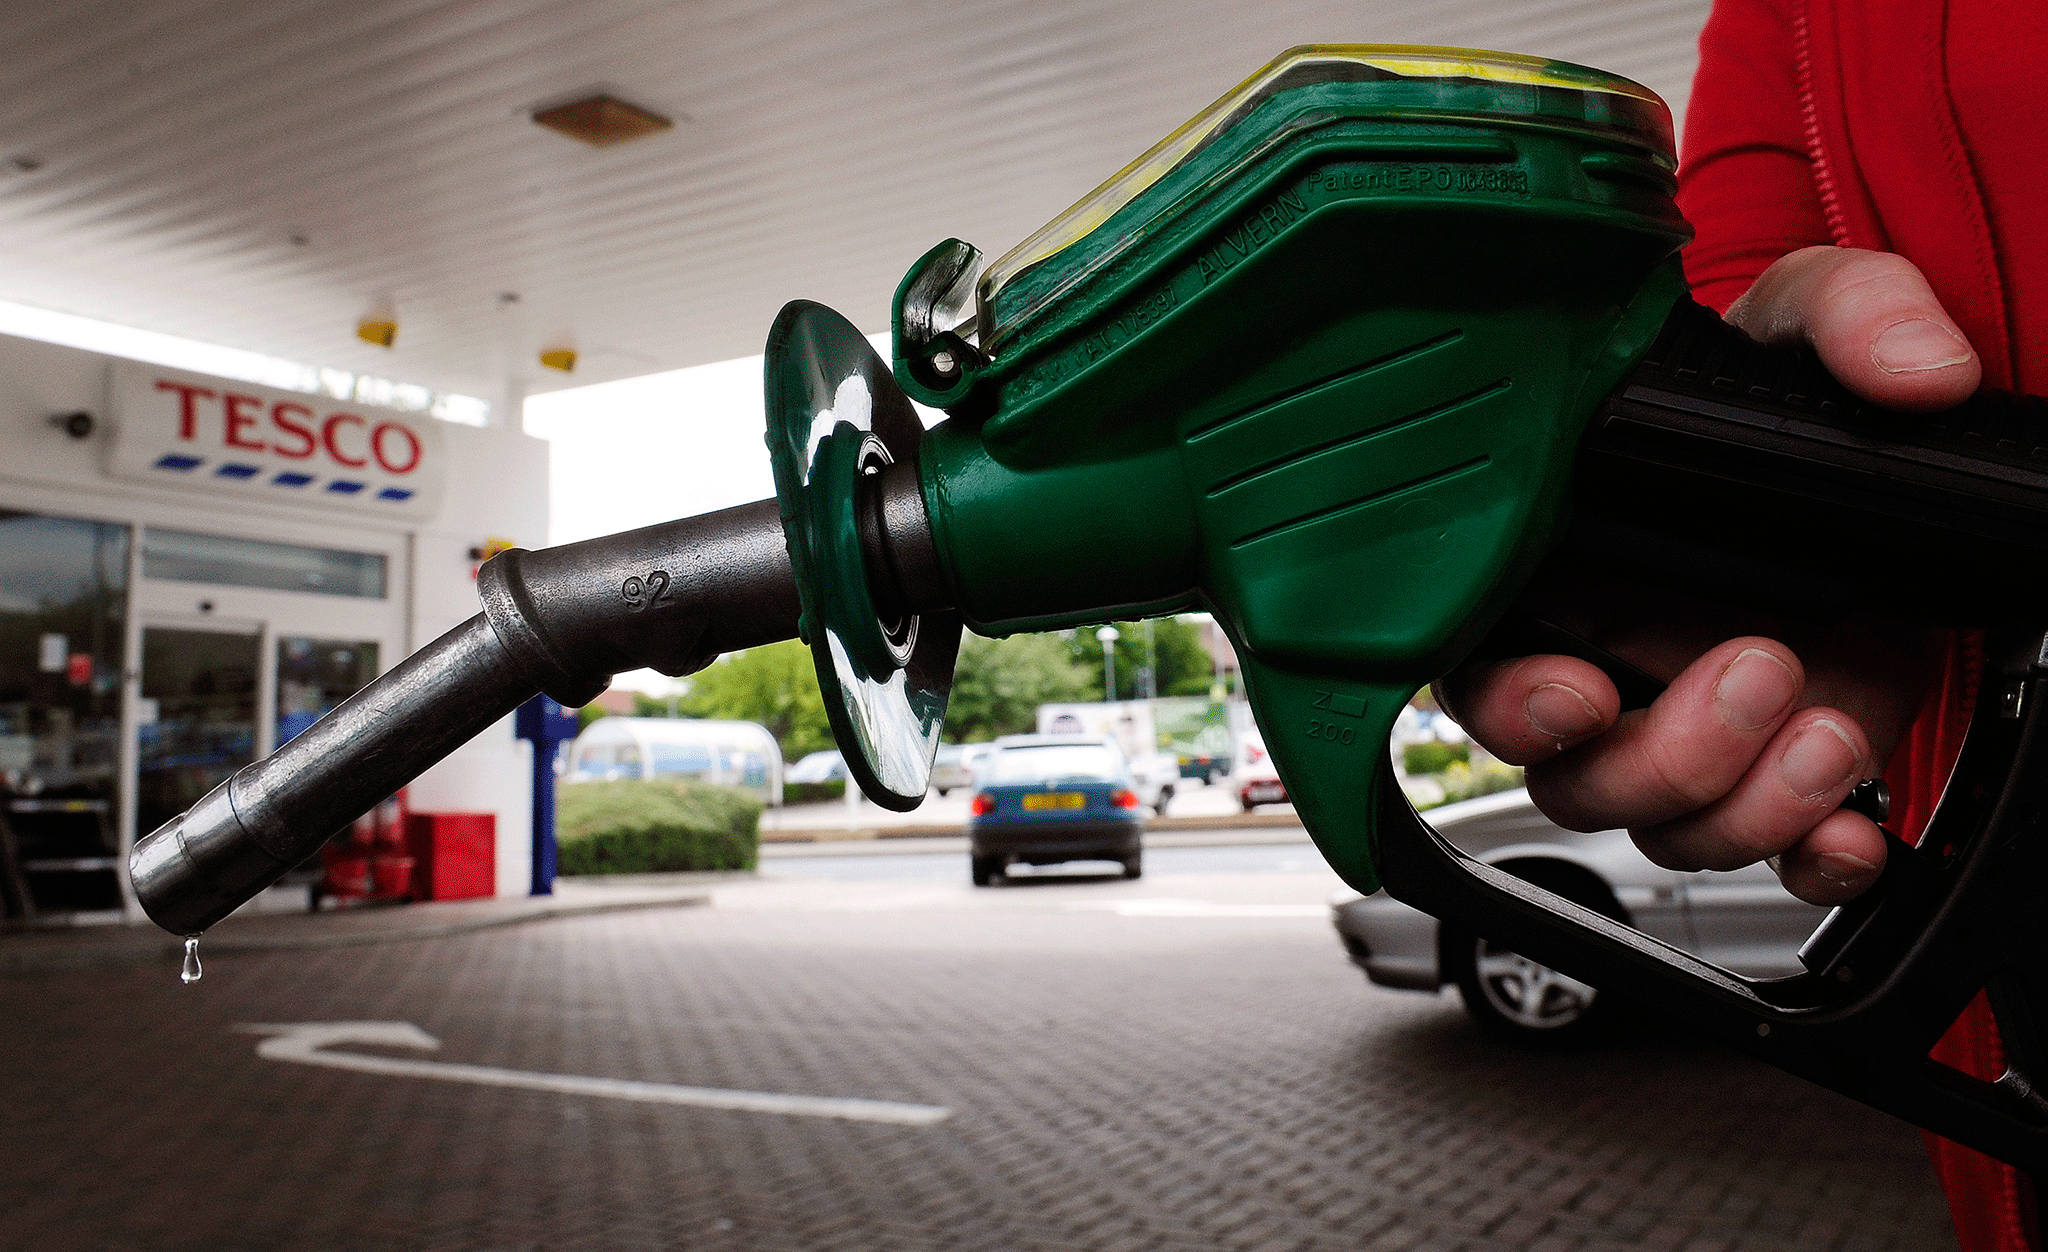 Tesco and the other large supermarkets have been accused of not passing on wholesale petrol savings to customers